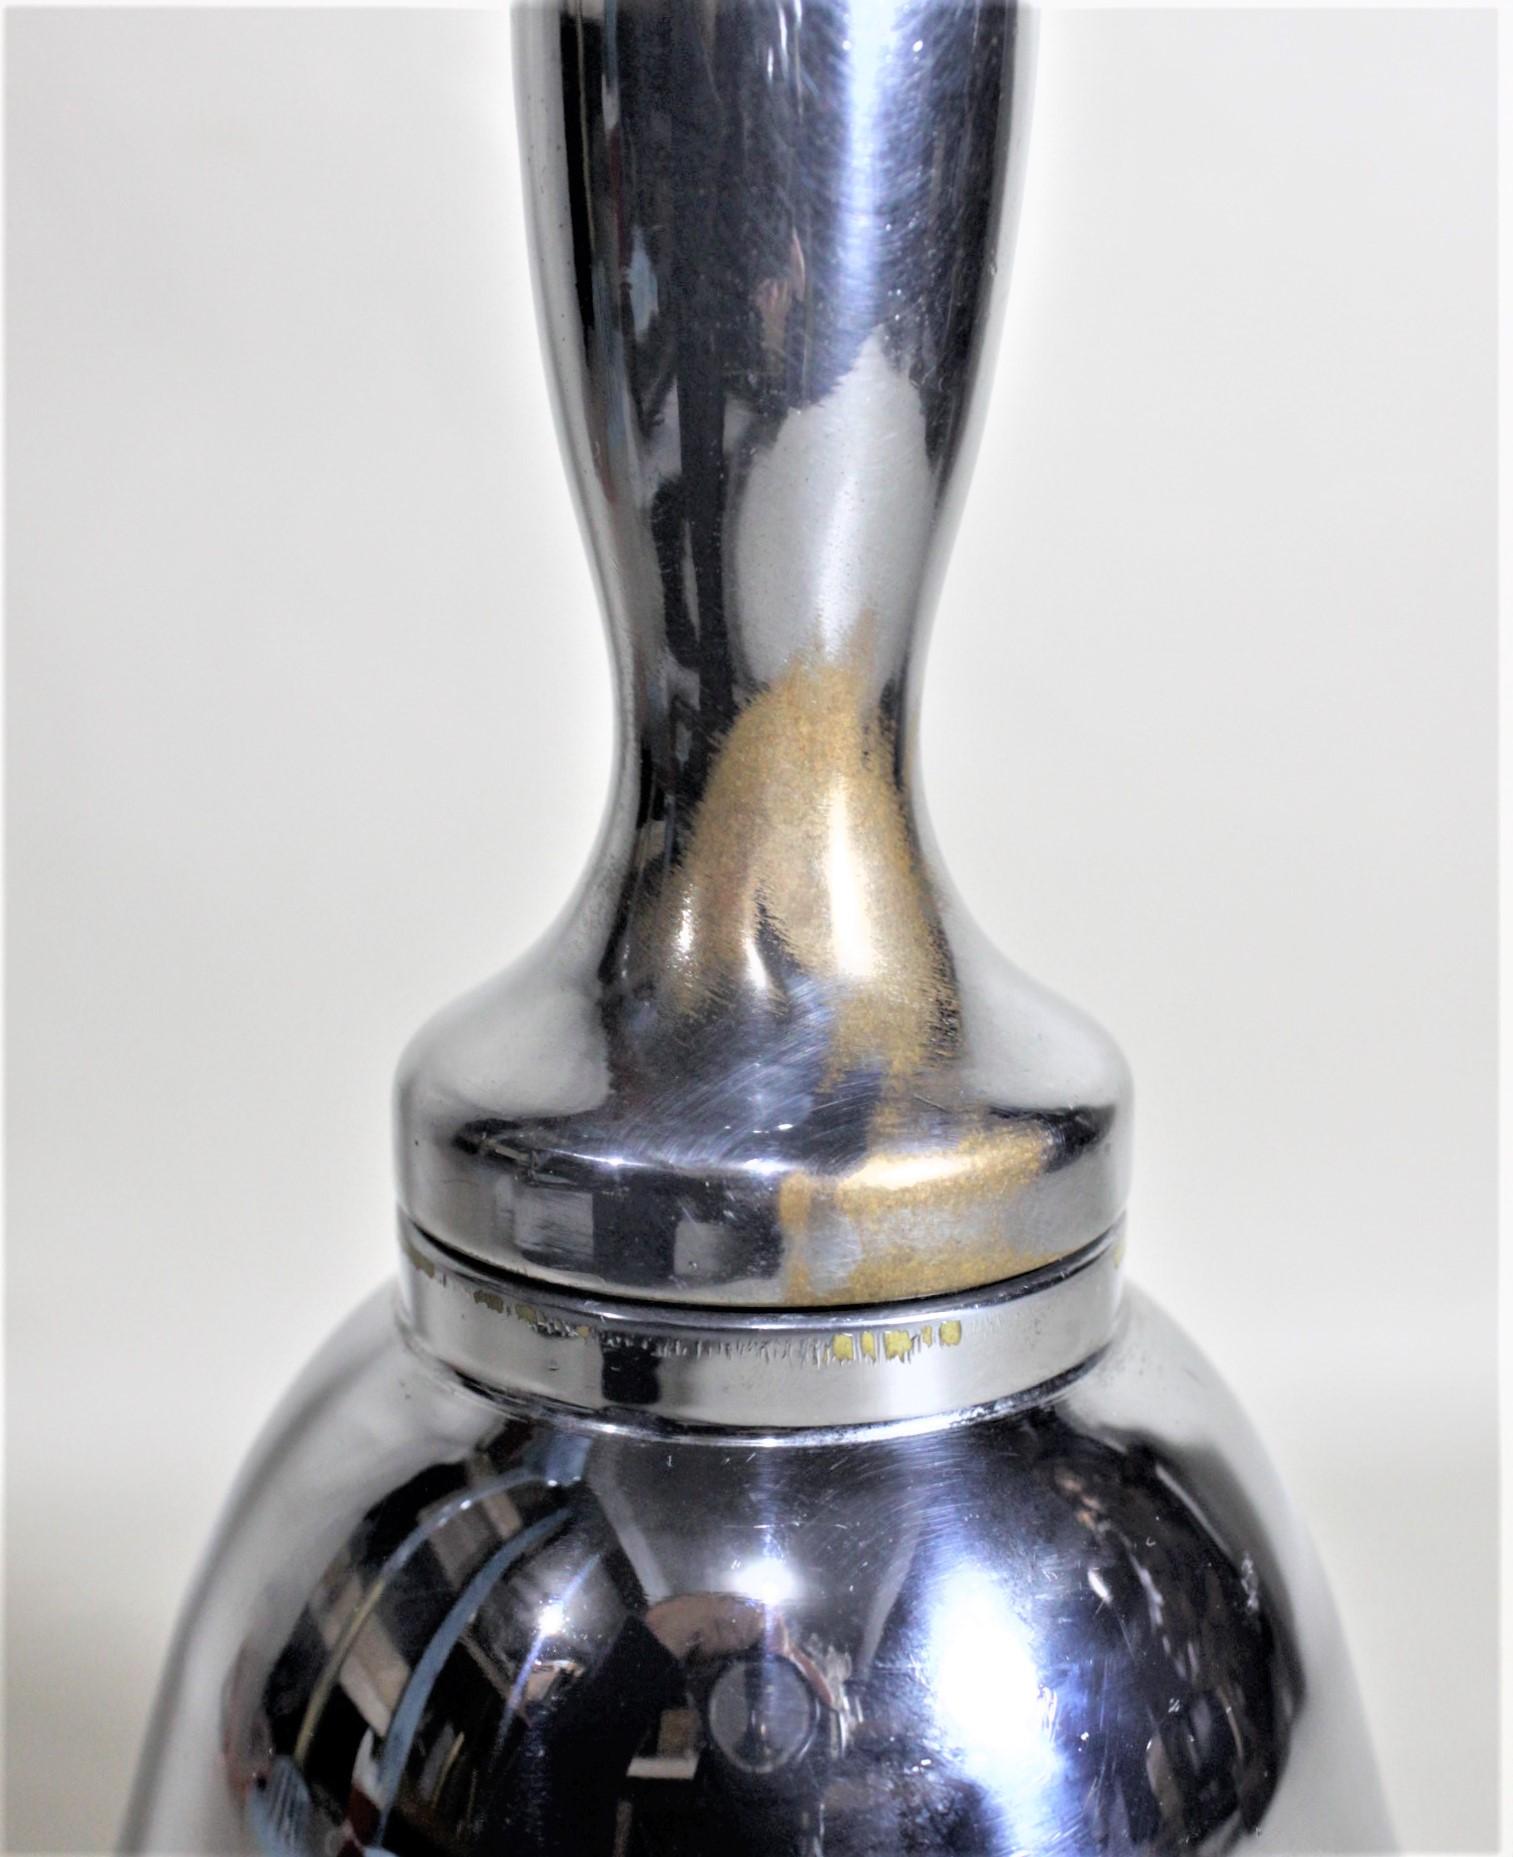 English Antique Silver Plated Hand Held School Bell Shaped Cocktail or Bar Shaker For Sale